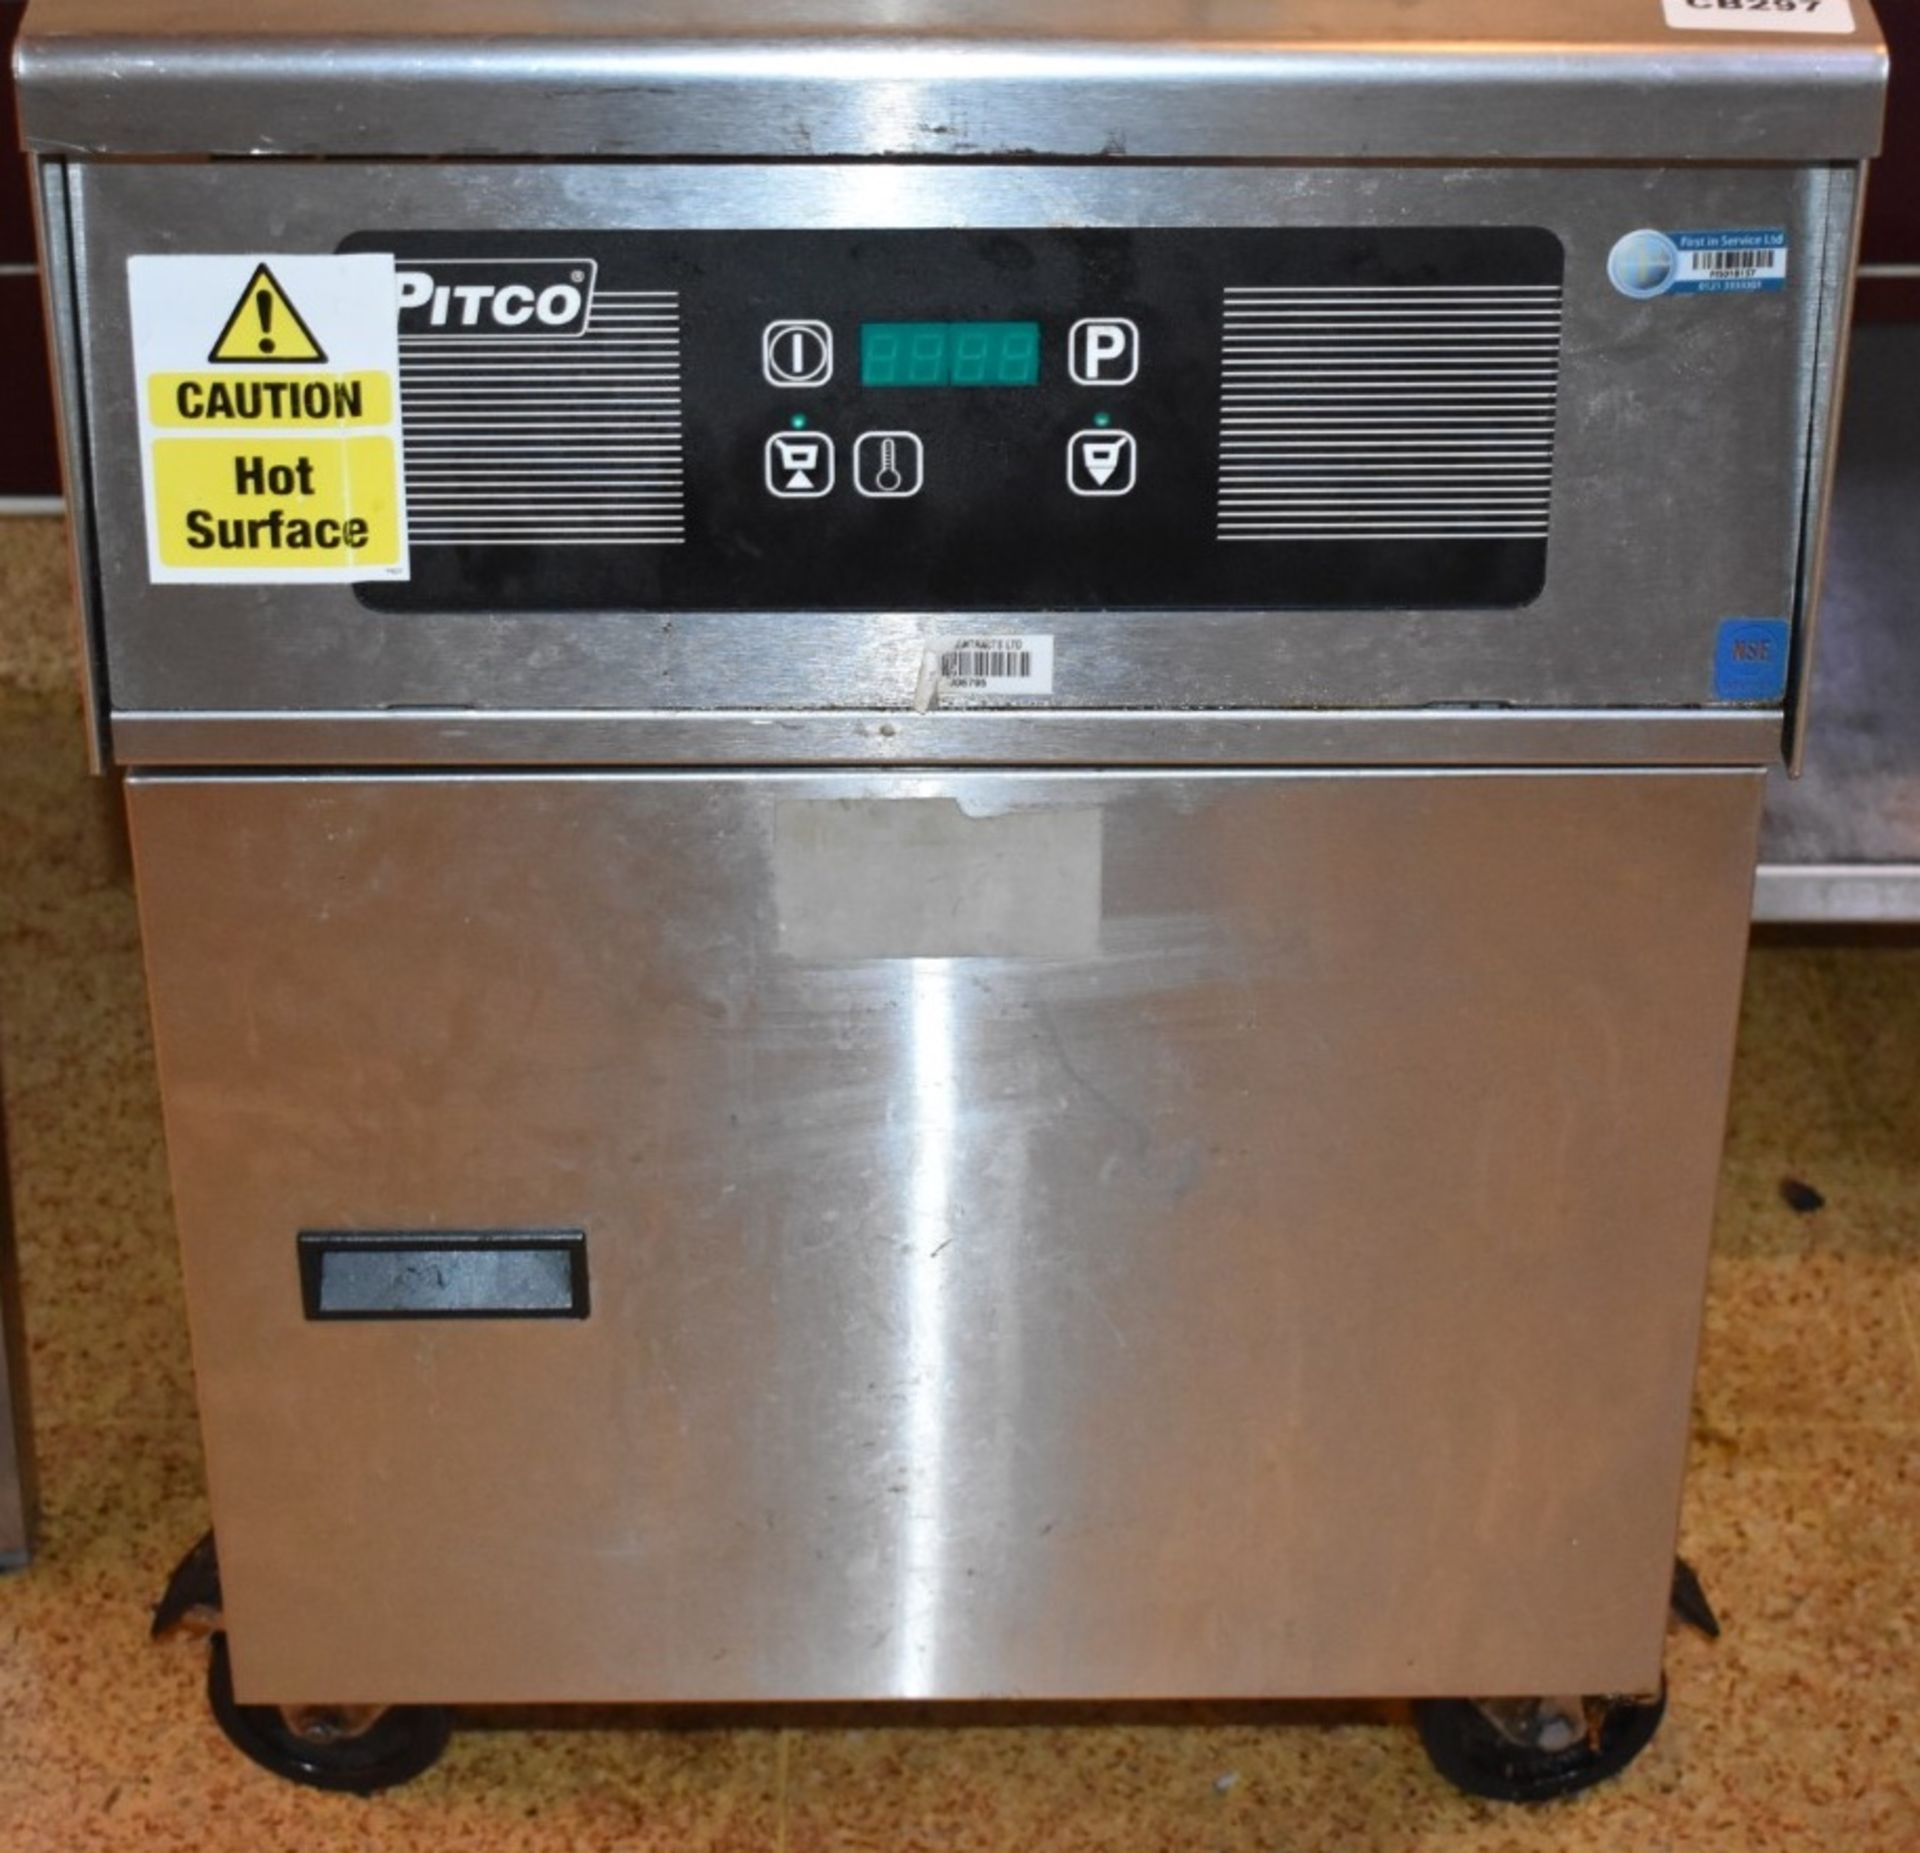 1 x Pifco Frialator Single Basket Gas Fryer With Basket Lifts - Stainless Steel Exterior - Model - Image 5 of 8